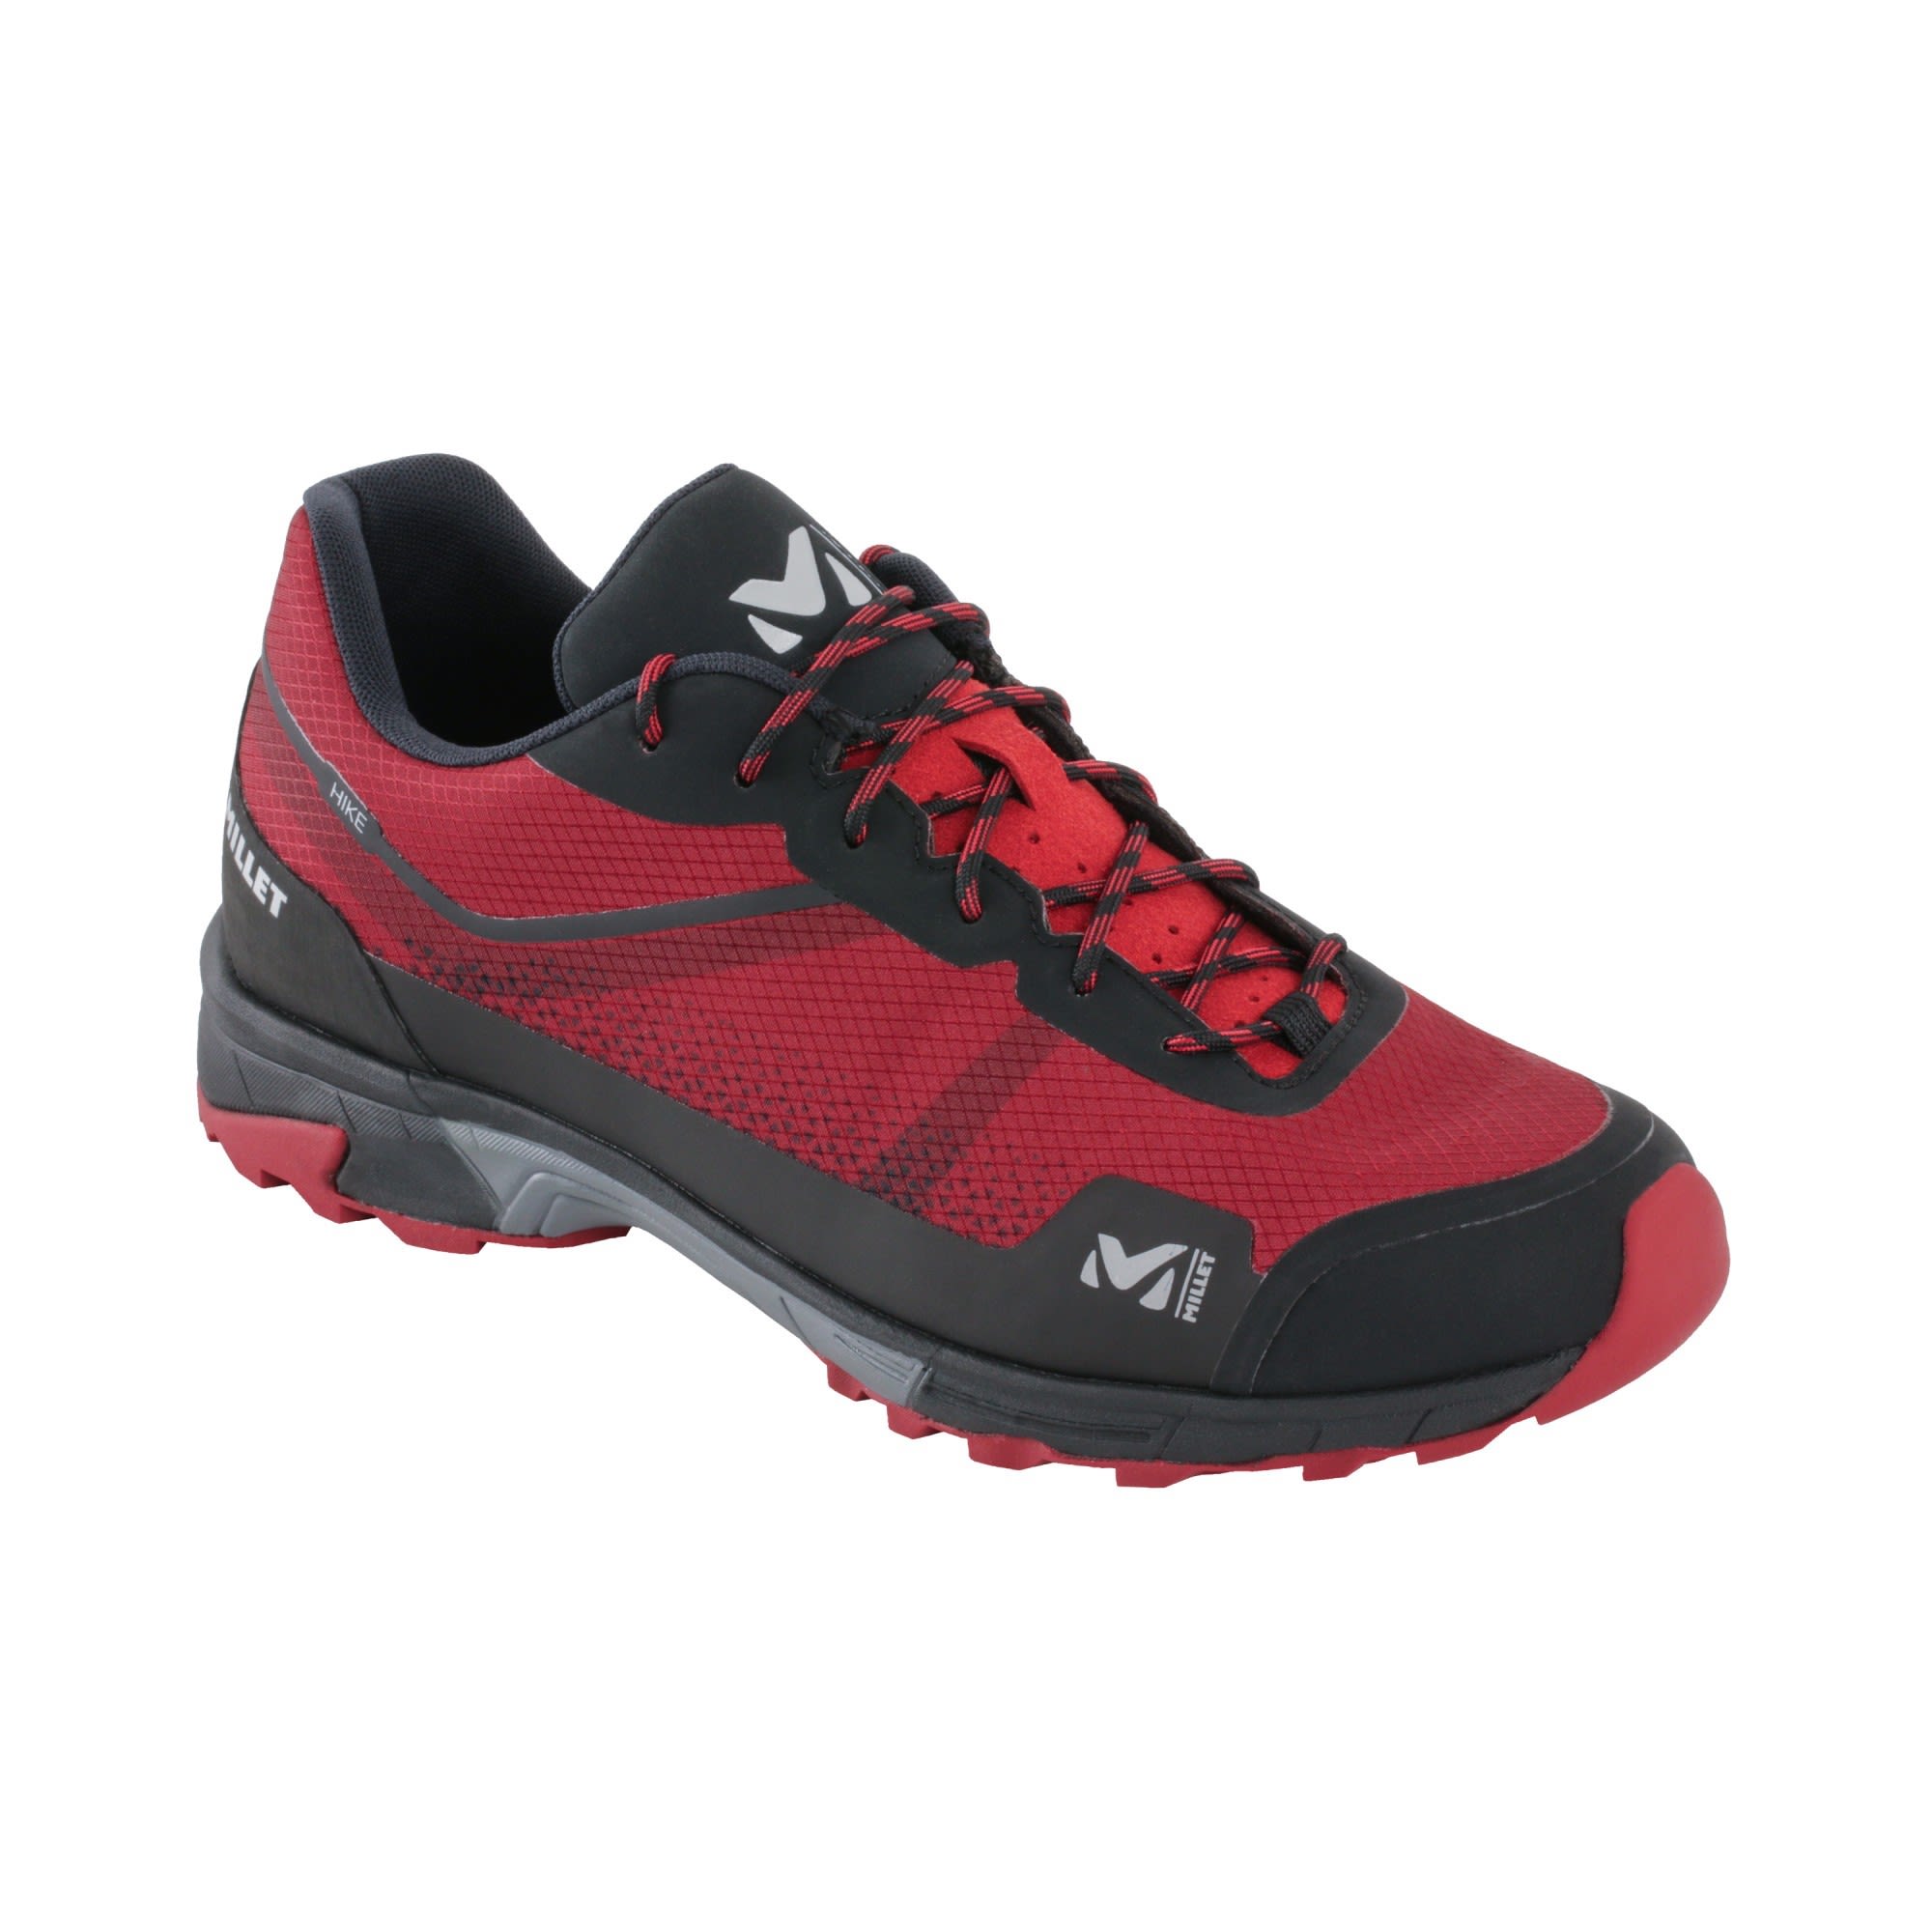 Millet Hike Rot- Male Hiking- und Approach-Schuhe- Grsse EU 45 1-3 - Farbe Red - Rouge